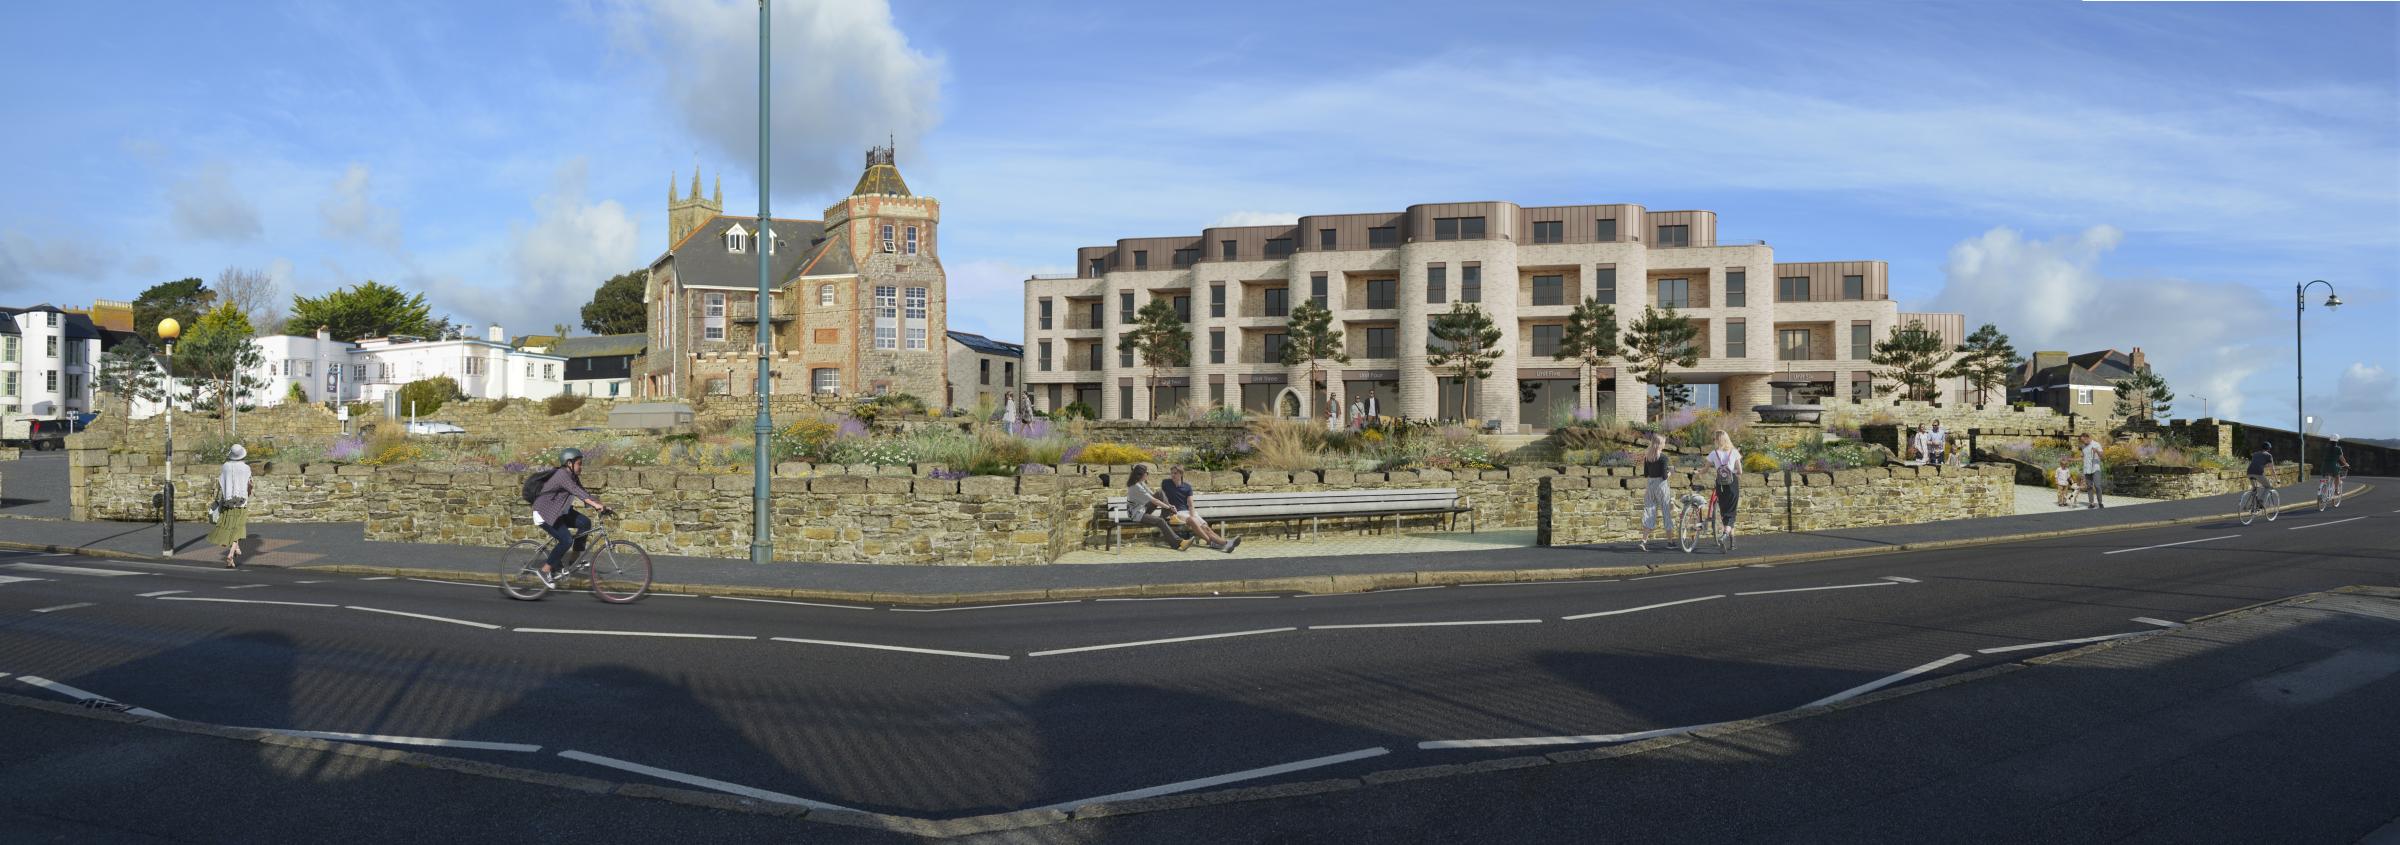 How the amended Coinagehall plans in Penzance look (Pic: Mei Loci Landscape Architects)